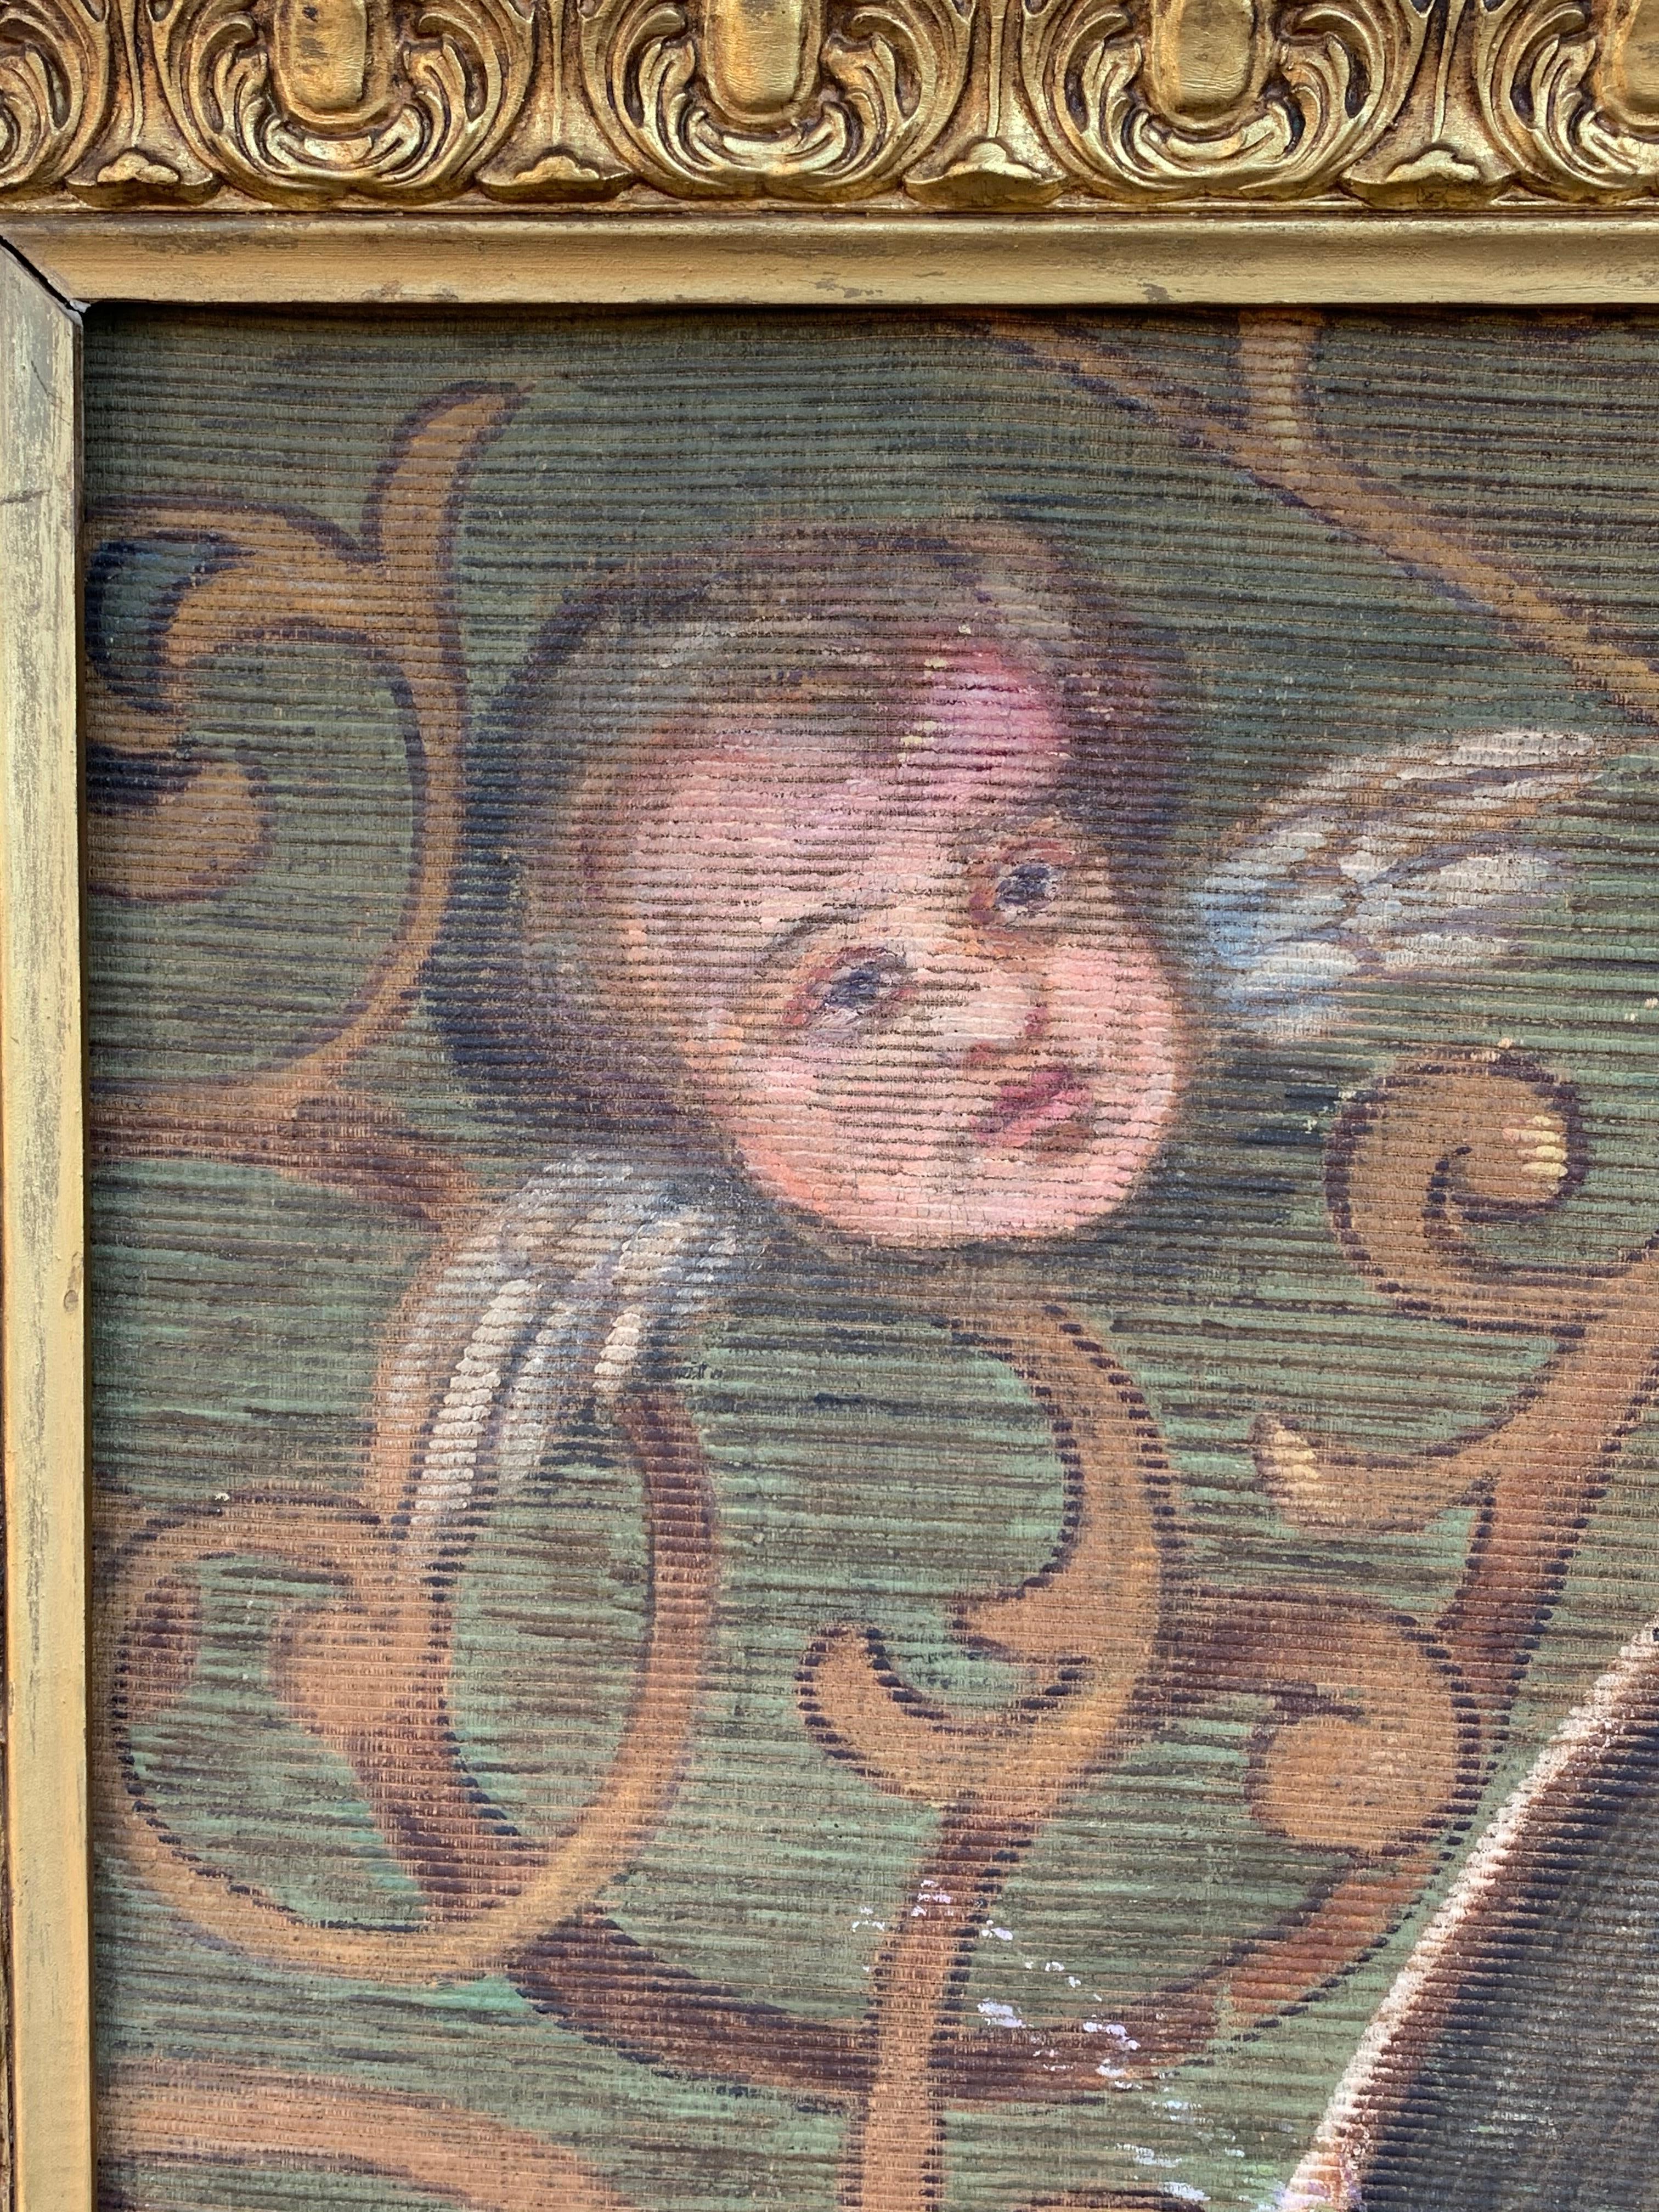 19th Century Hand Painted Tapestry Depicting Madonna with a Child In Good Condition For Sale In Miami, FL